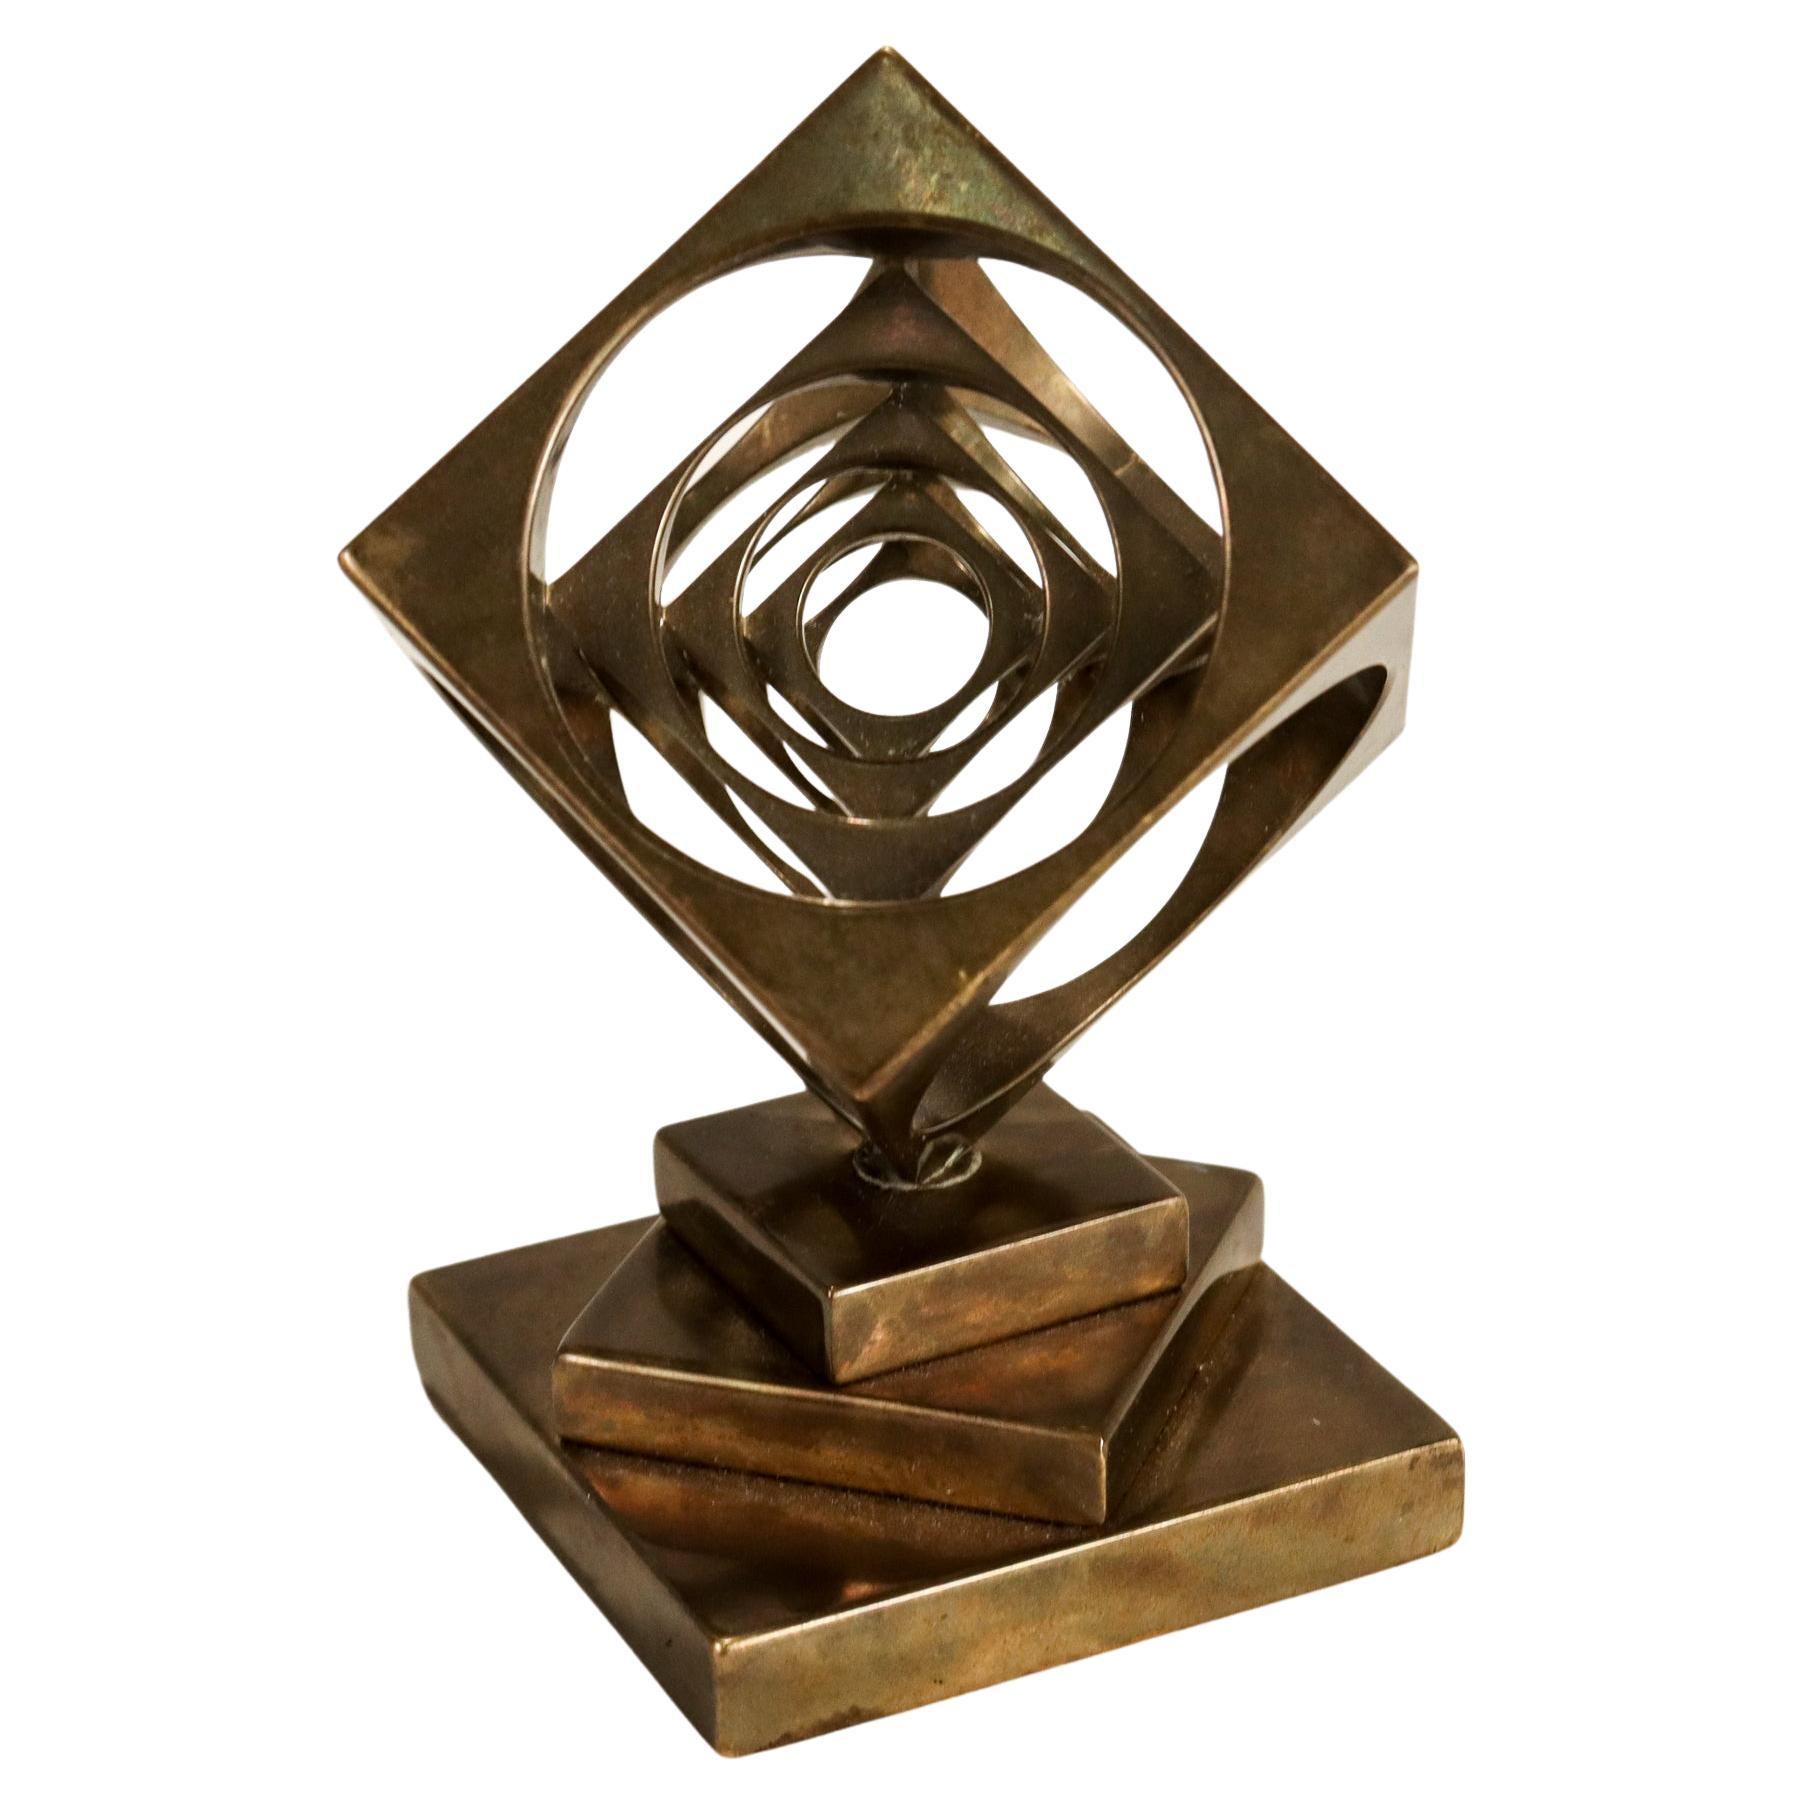 Unknown Midcentury Geometric Machined Bronze Turner's Cube Desk Paperweight / Sculpture